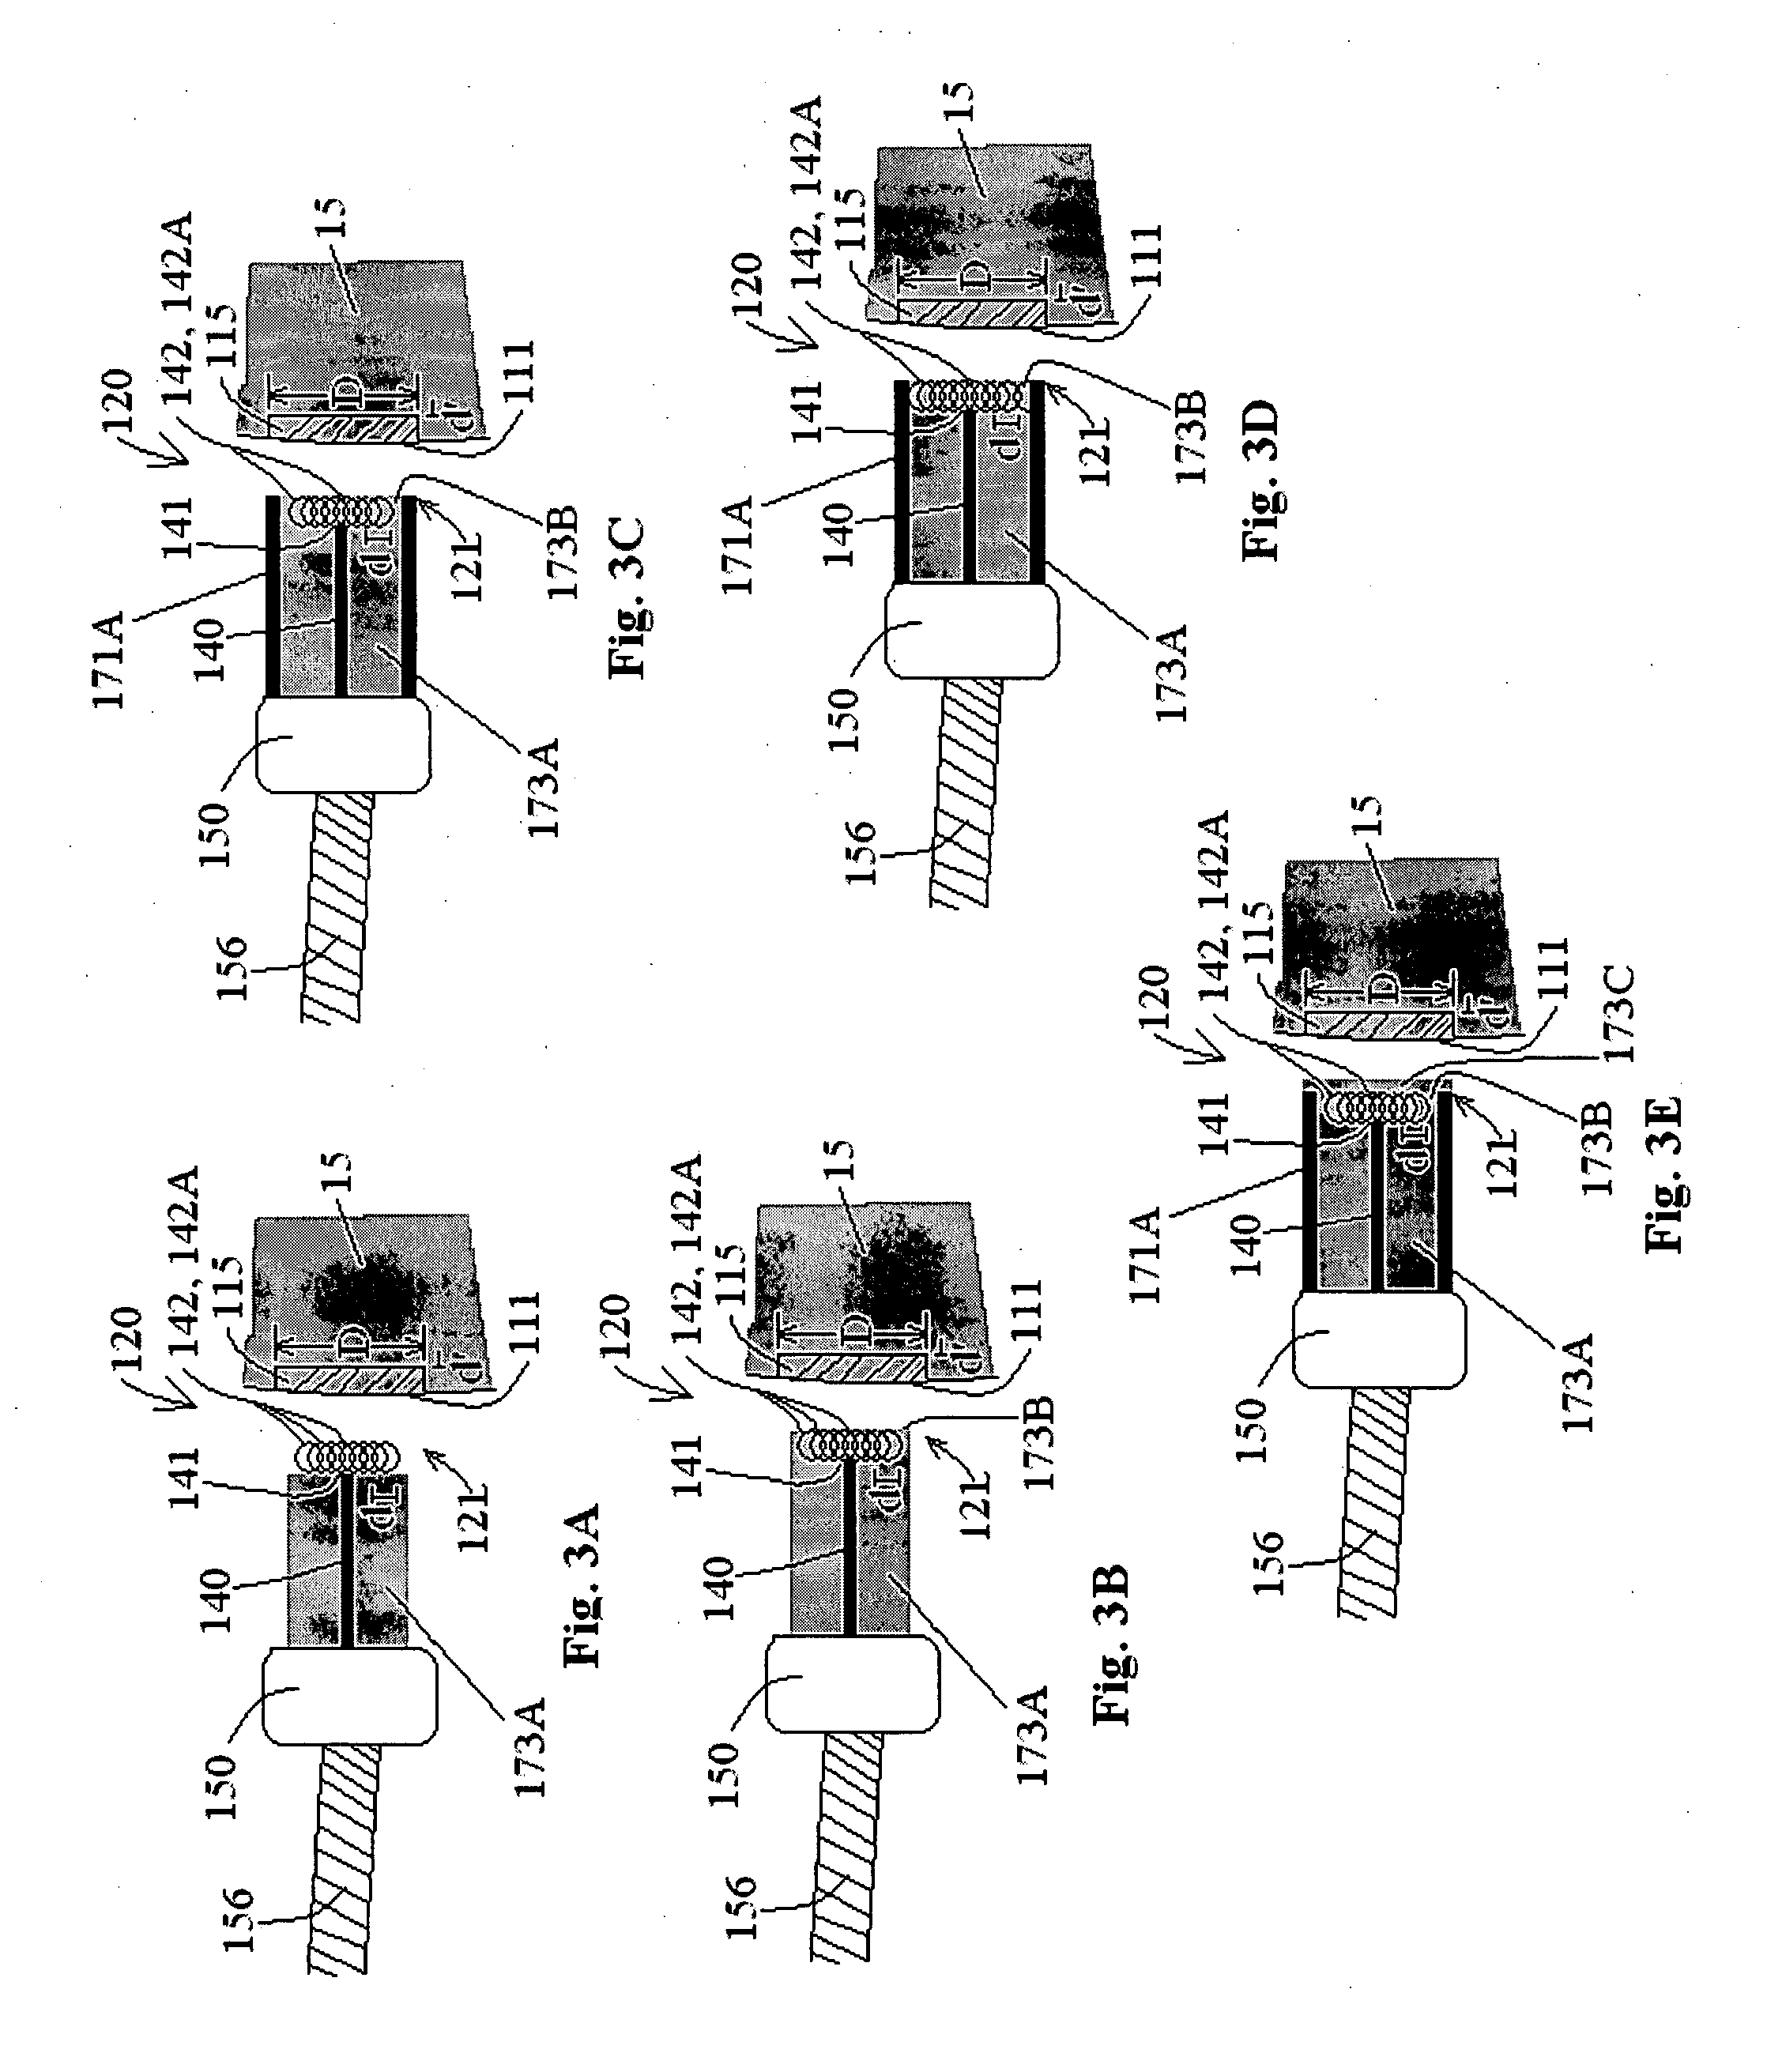 Probes, systems, and methods for examining tissue according to the dielectric properties thereof